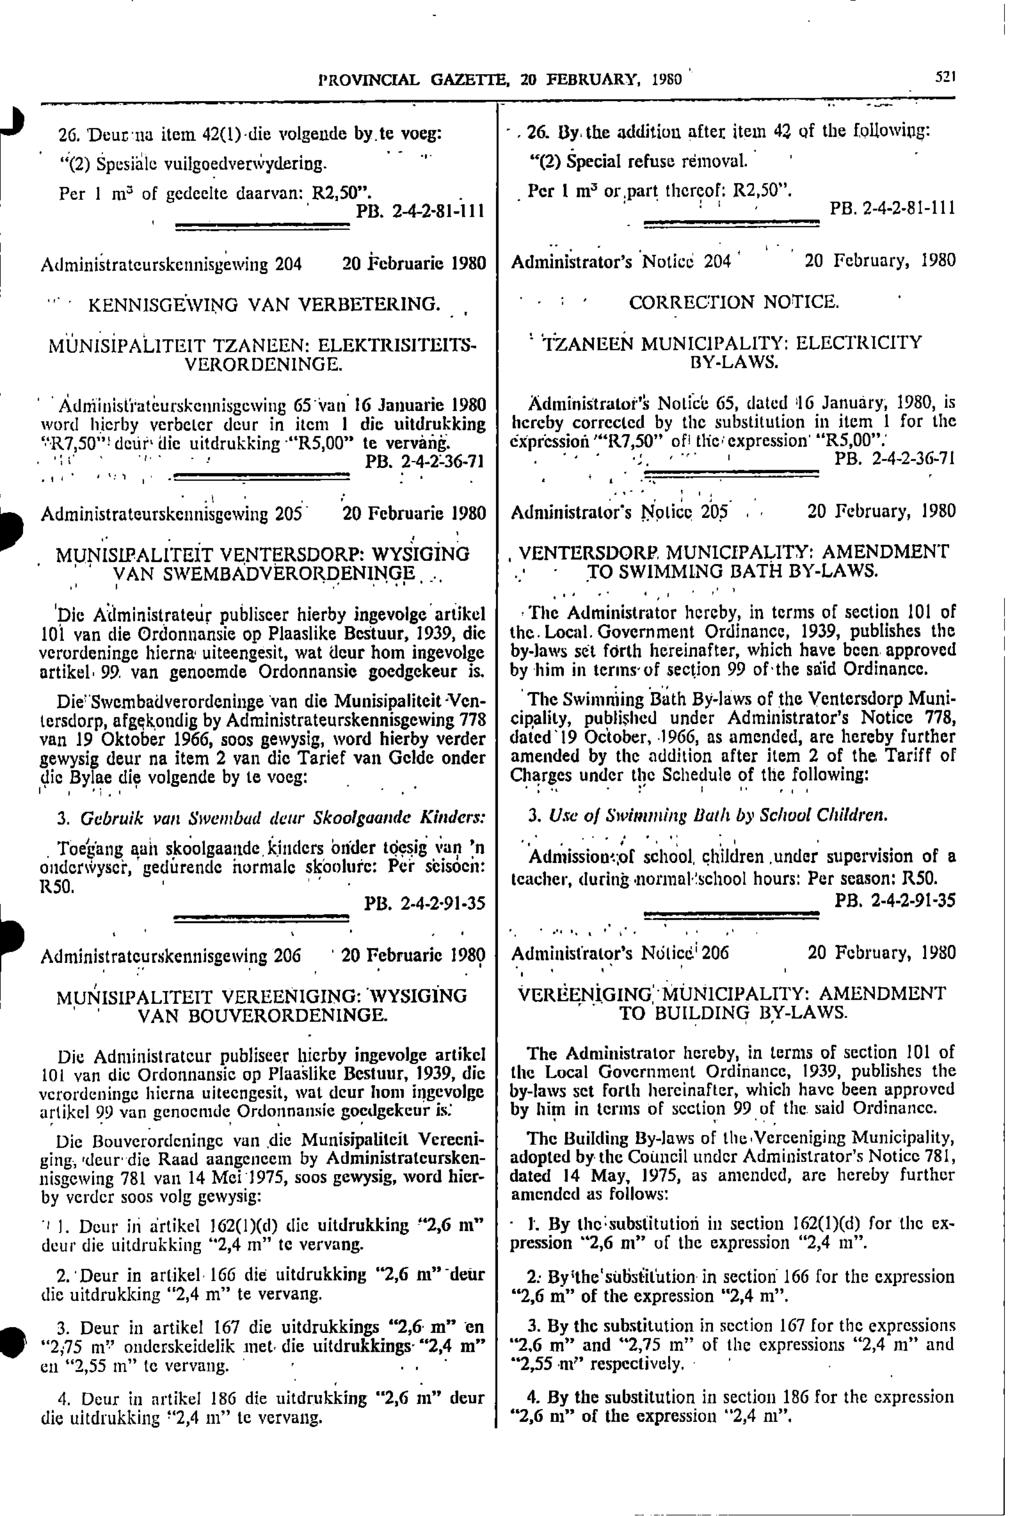 1 1 26 Deurna item 42(1) die volgende byte voeg: "(2) Spesiele vuilgoedverwydering PROVNCAL GAZETTE 20 FEBRUARY 1980 521 26 By the addition after item 42 of the following: "(2) Special refuse removal